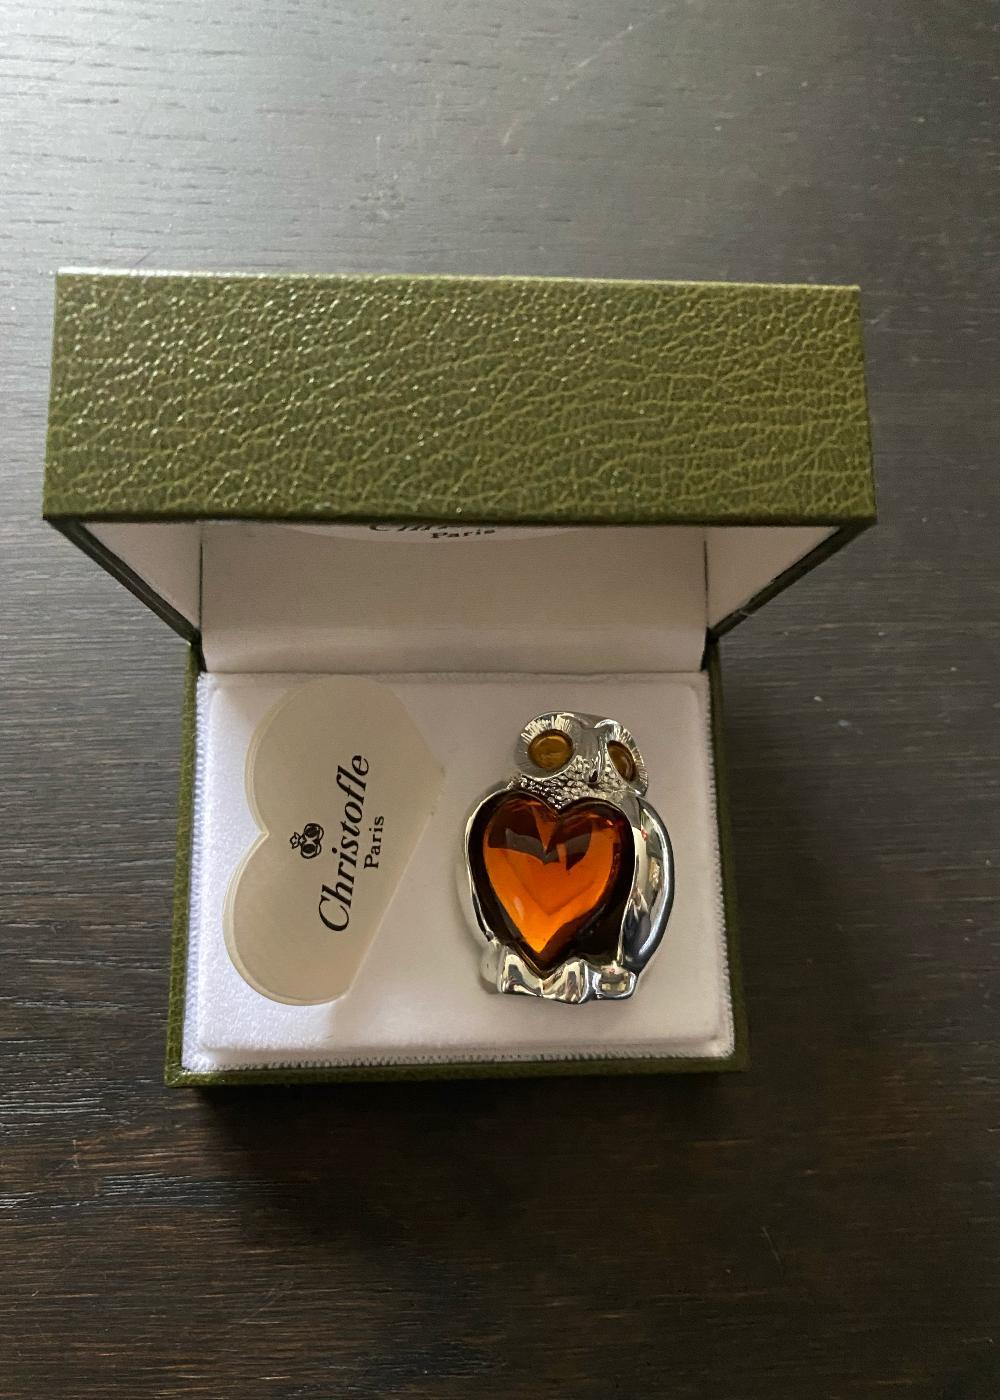 Beautiful small Christofle silver plate topaz heart owl figurine or paperweight. Marked: Christofle, maker's marks. Comes with box. Was never displayed, kept in the box. 
Measurements box: 9cm width x 7cm and 4cm high.